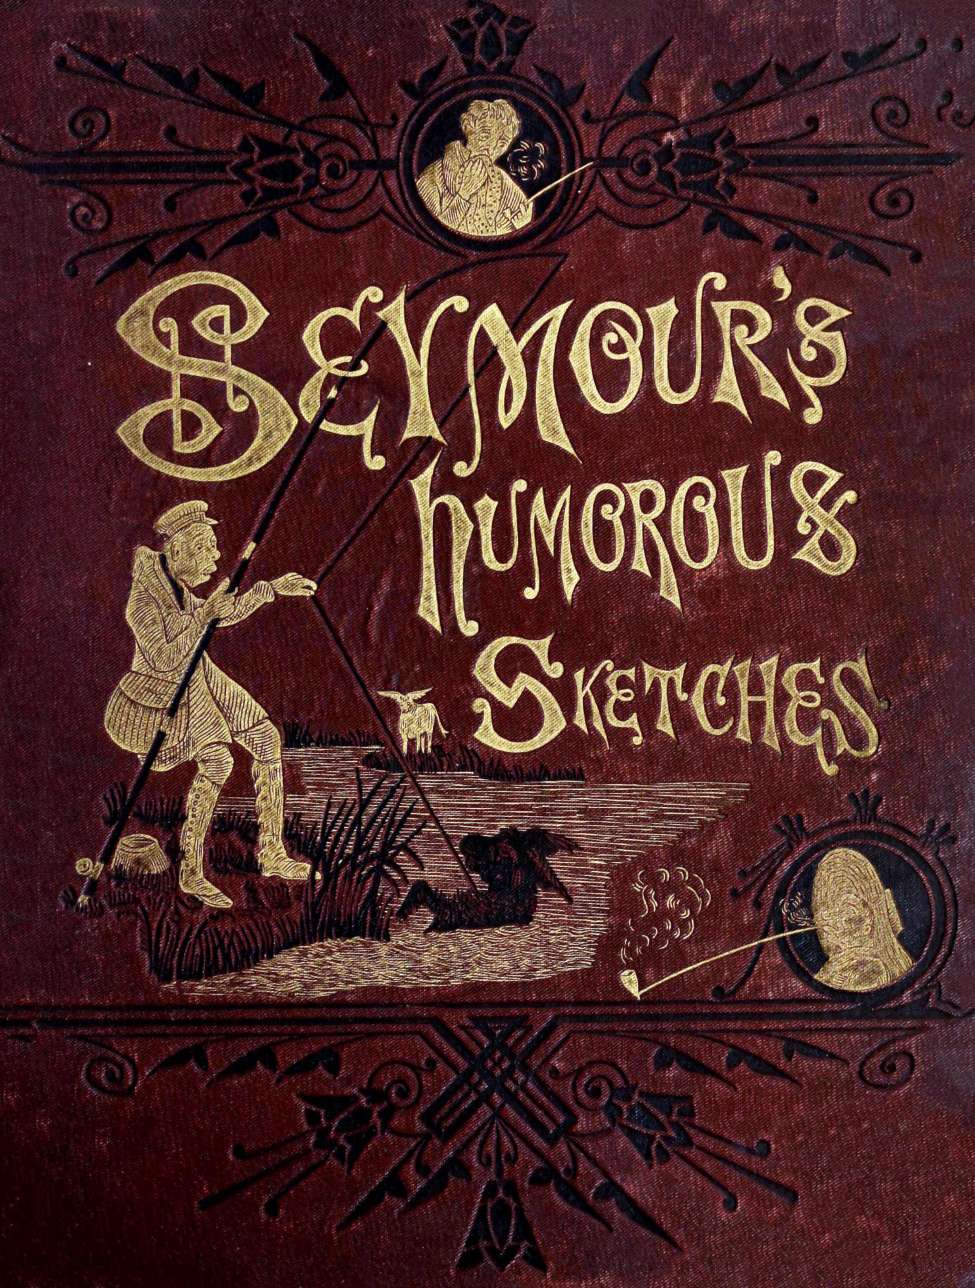 Book Cover For Seymour's Humorous Sketches